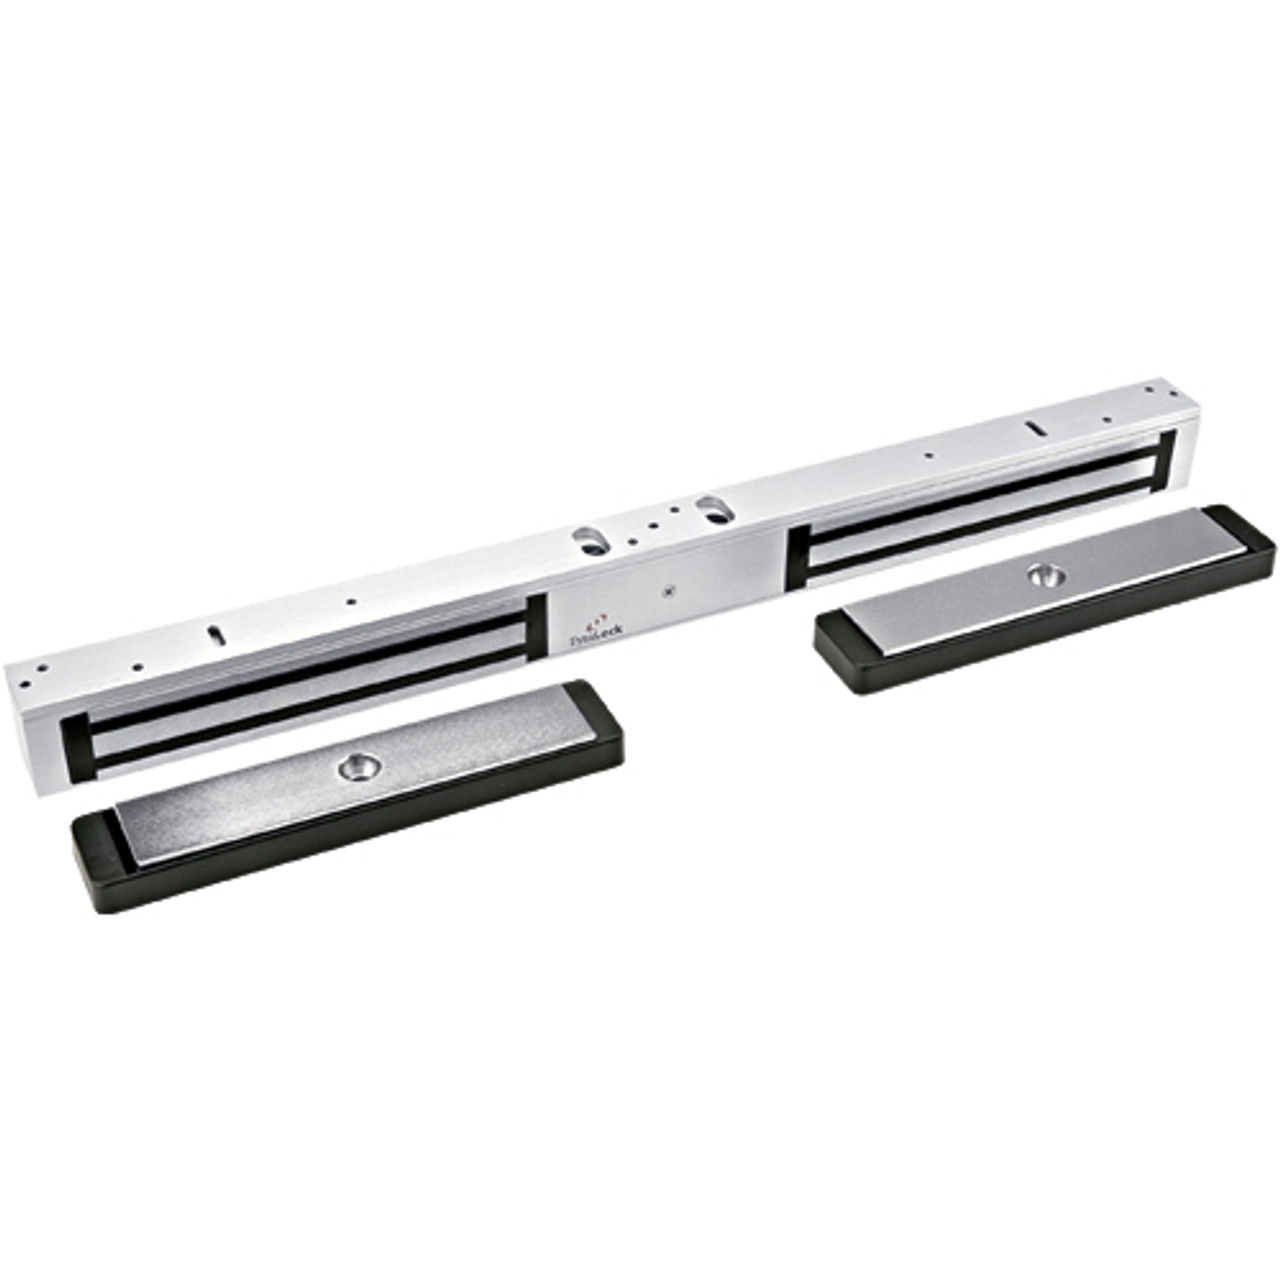 2282-US26-HSM2 DynaLock 2280 Series Double SlimLine Electromagnetic Lock for Outswing Door With HSM in Bright Chrome